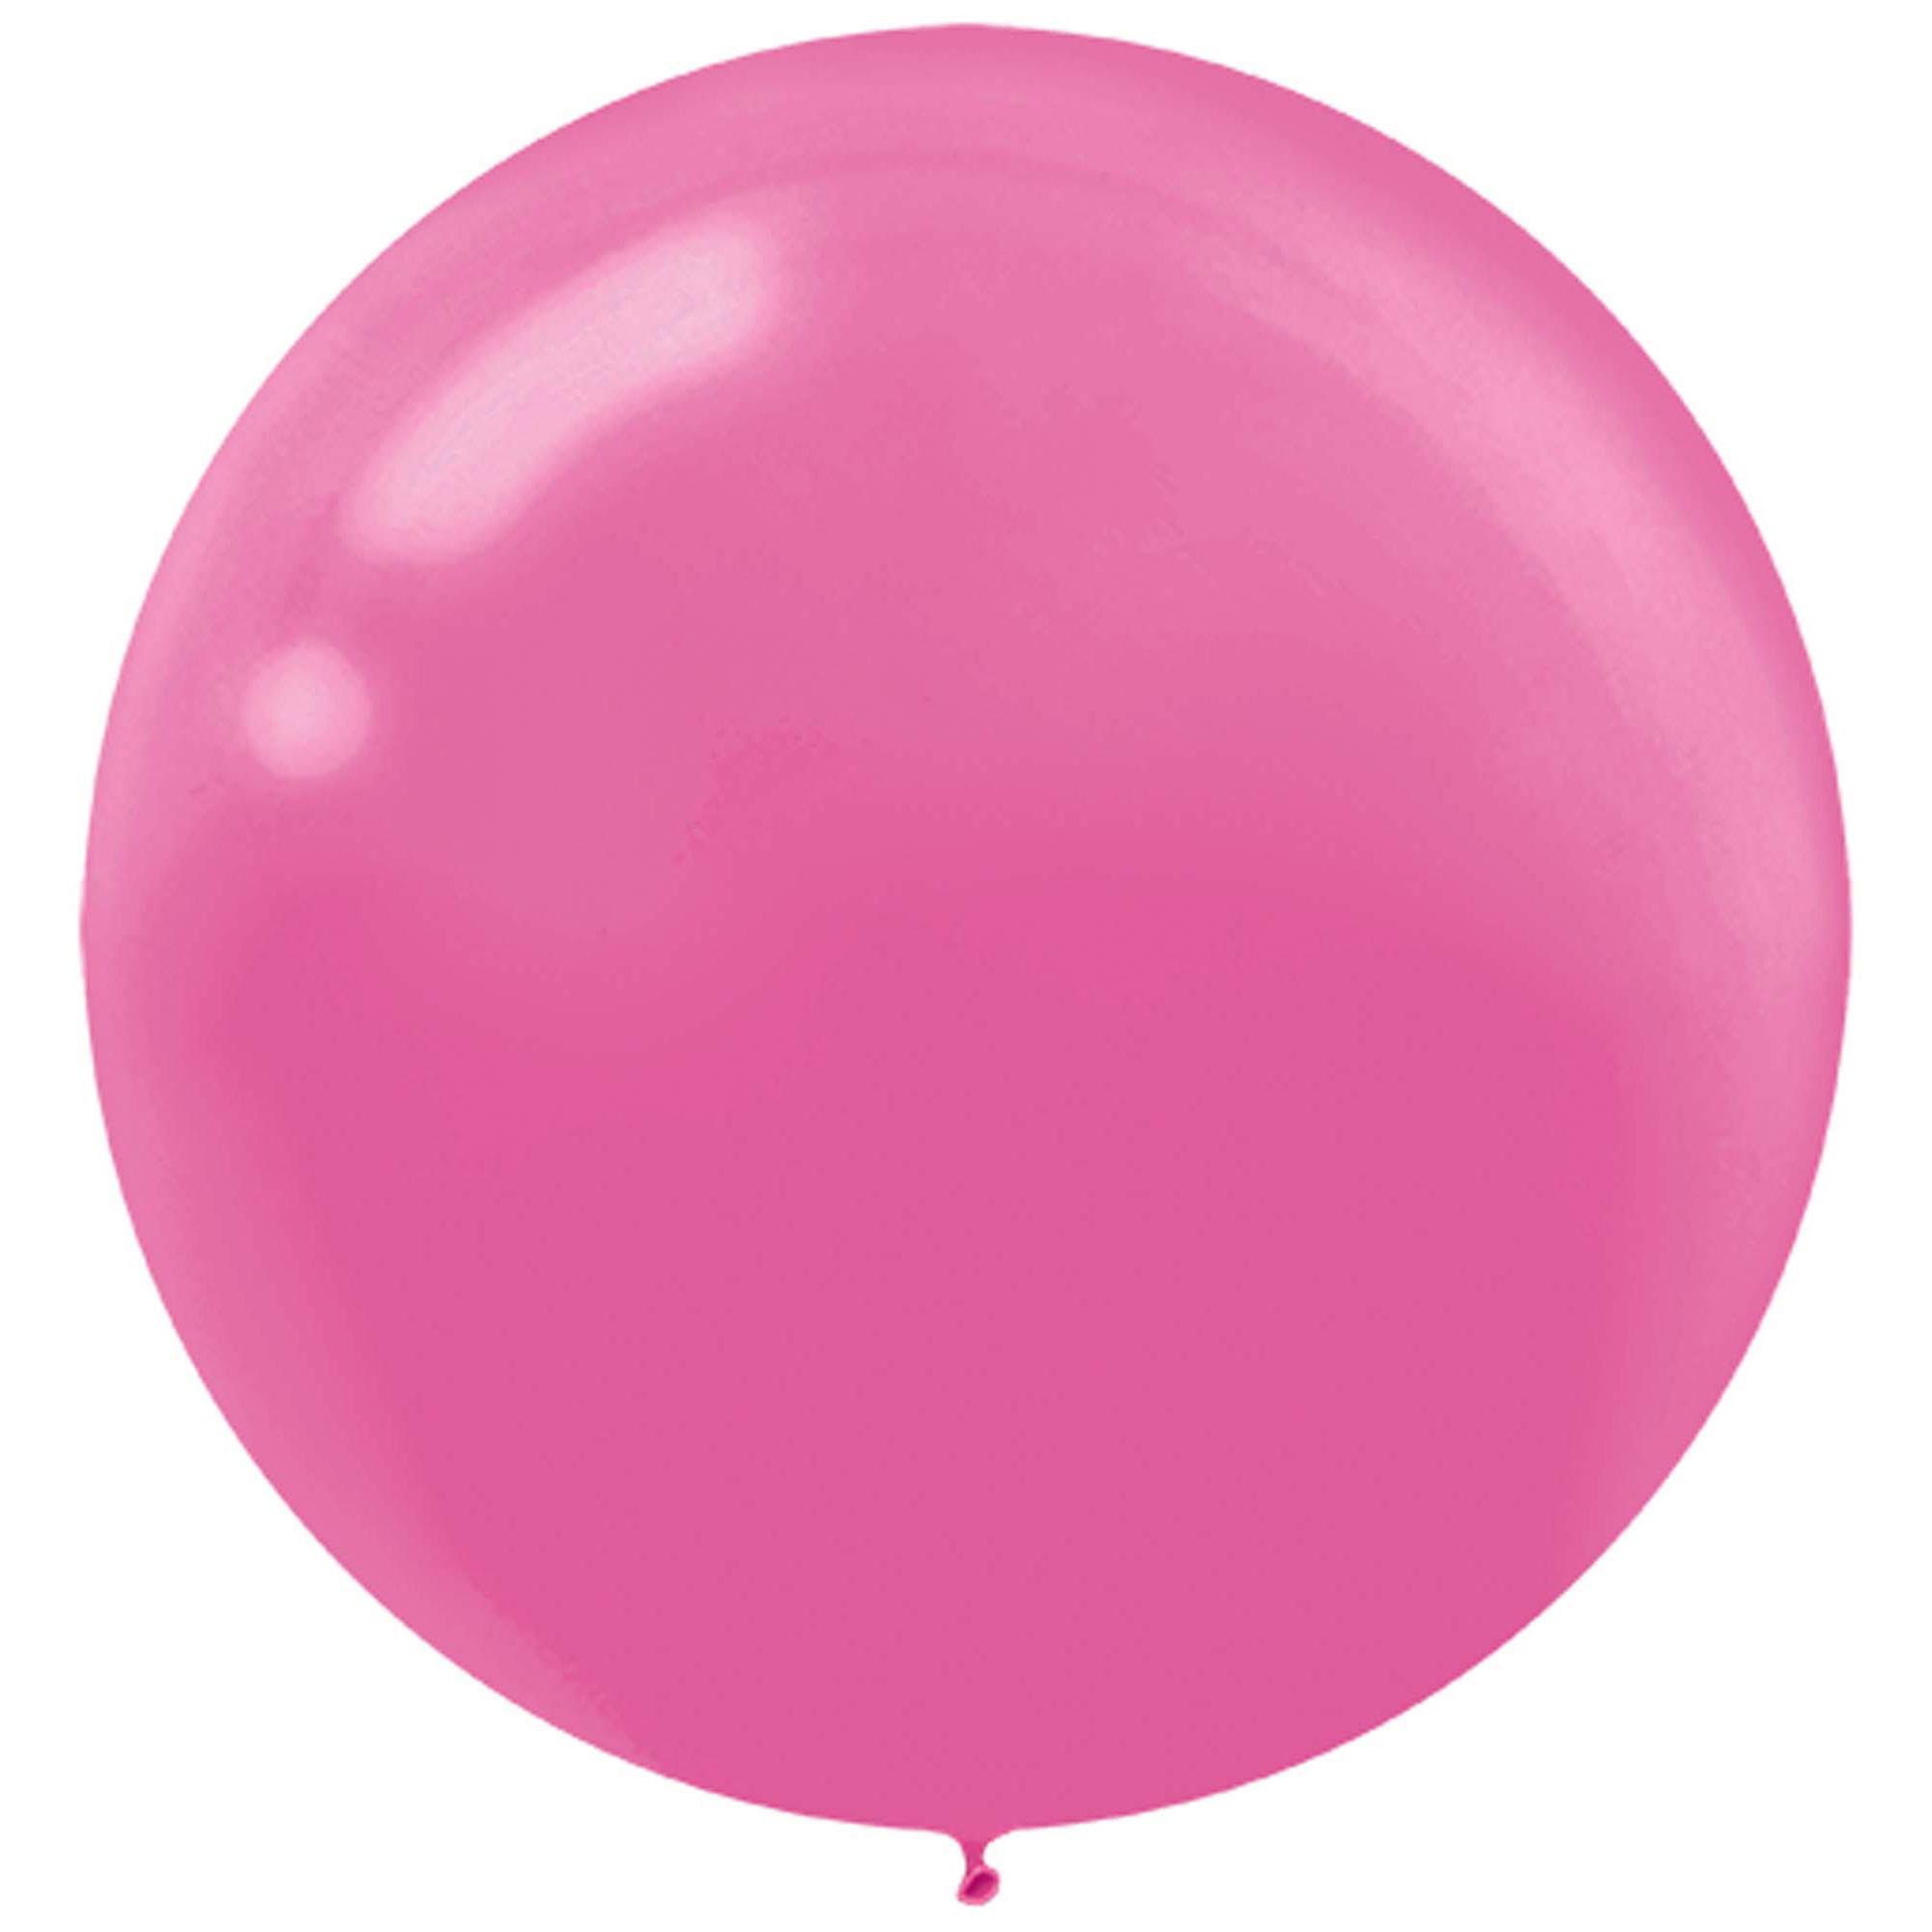 Bright Pink Latex Balloon 24in, 4pcs Balloons & Streamers - Party Centre